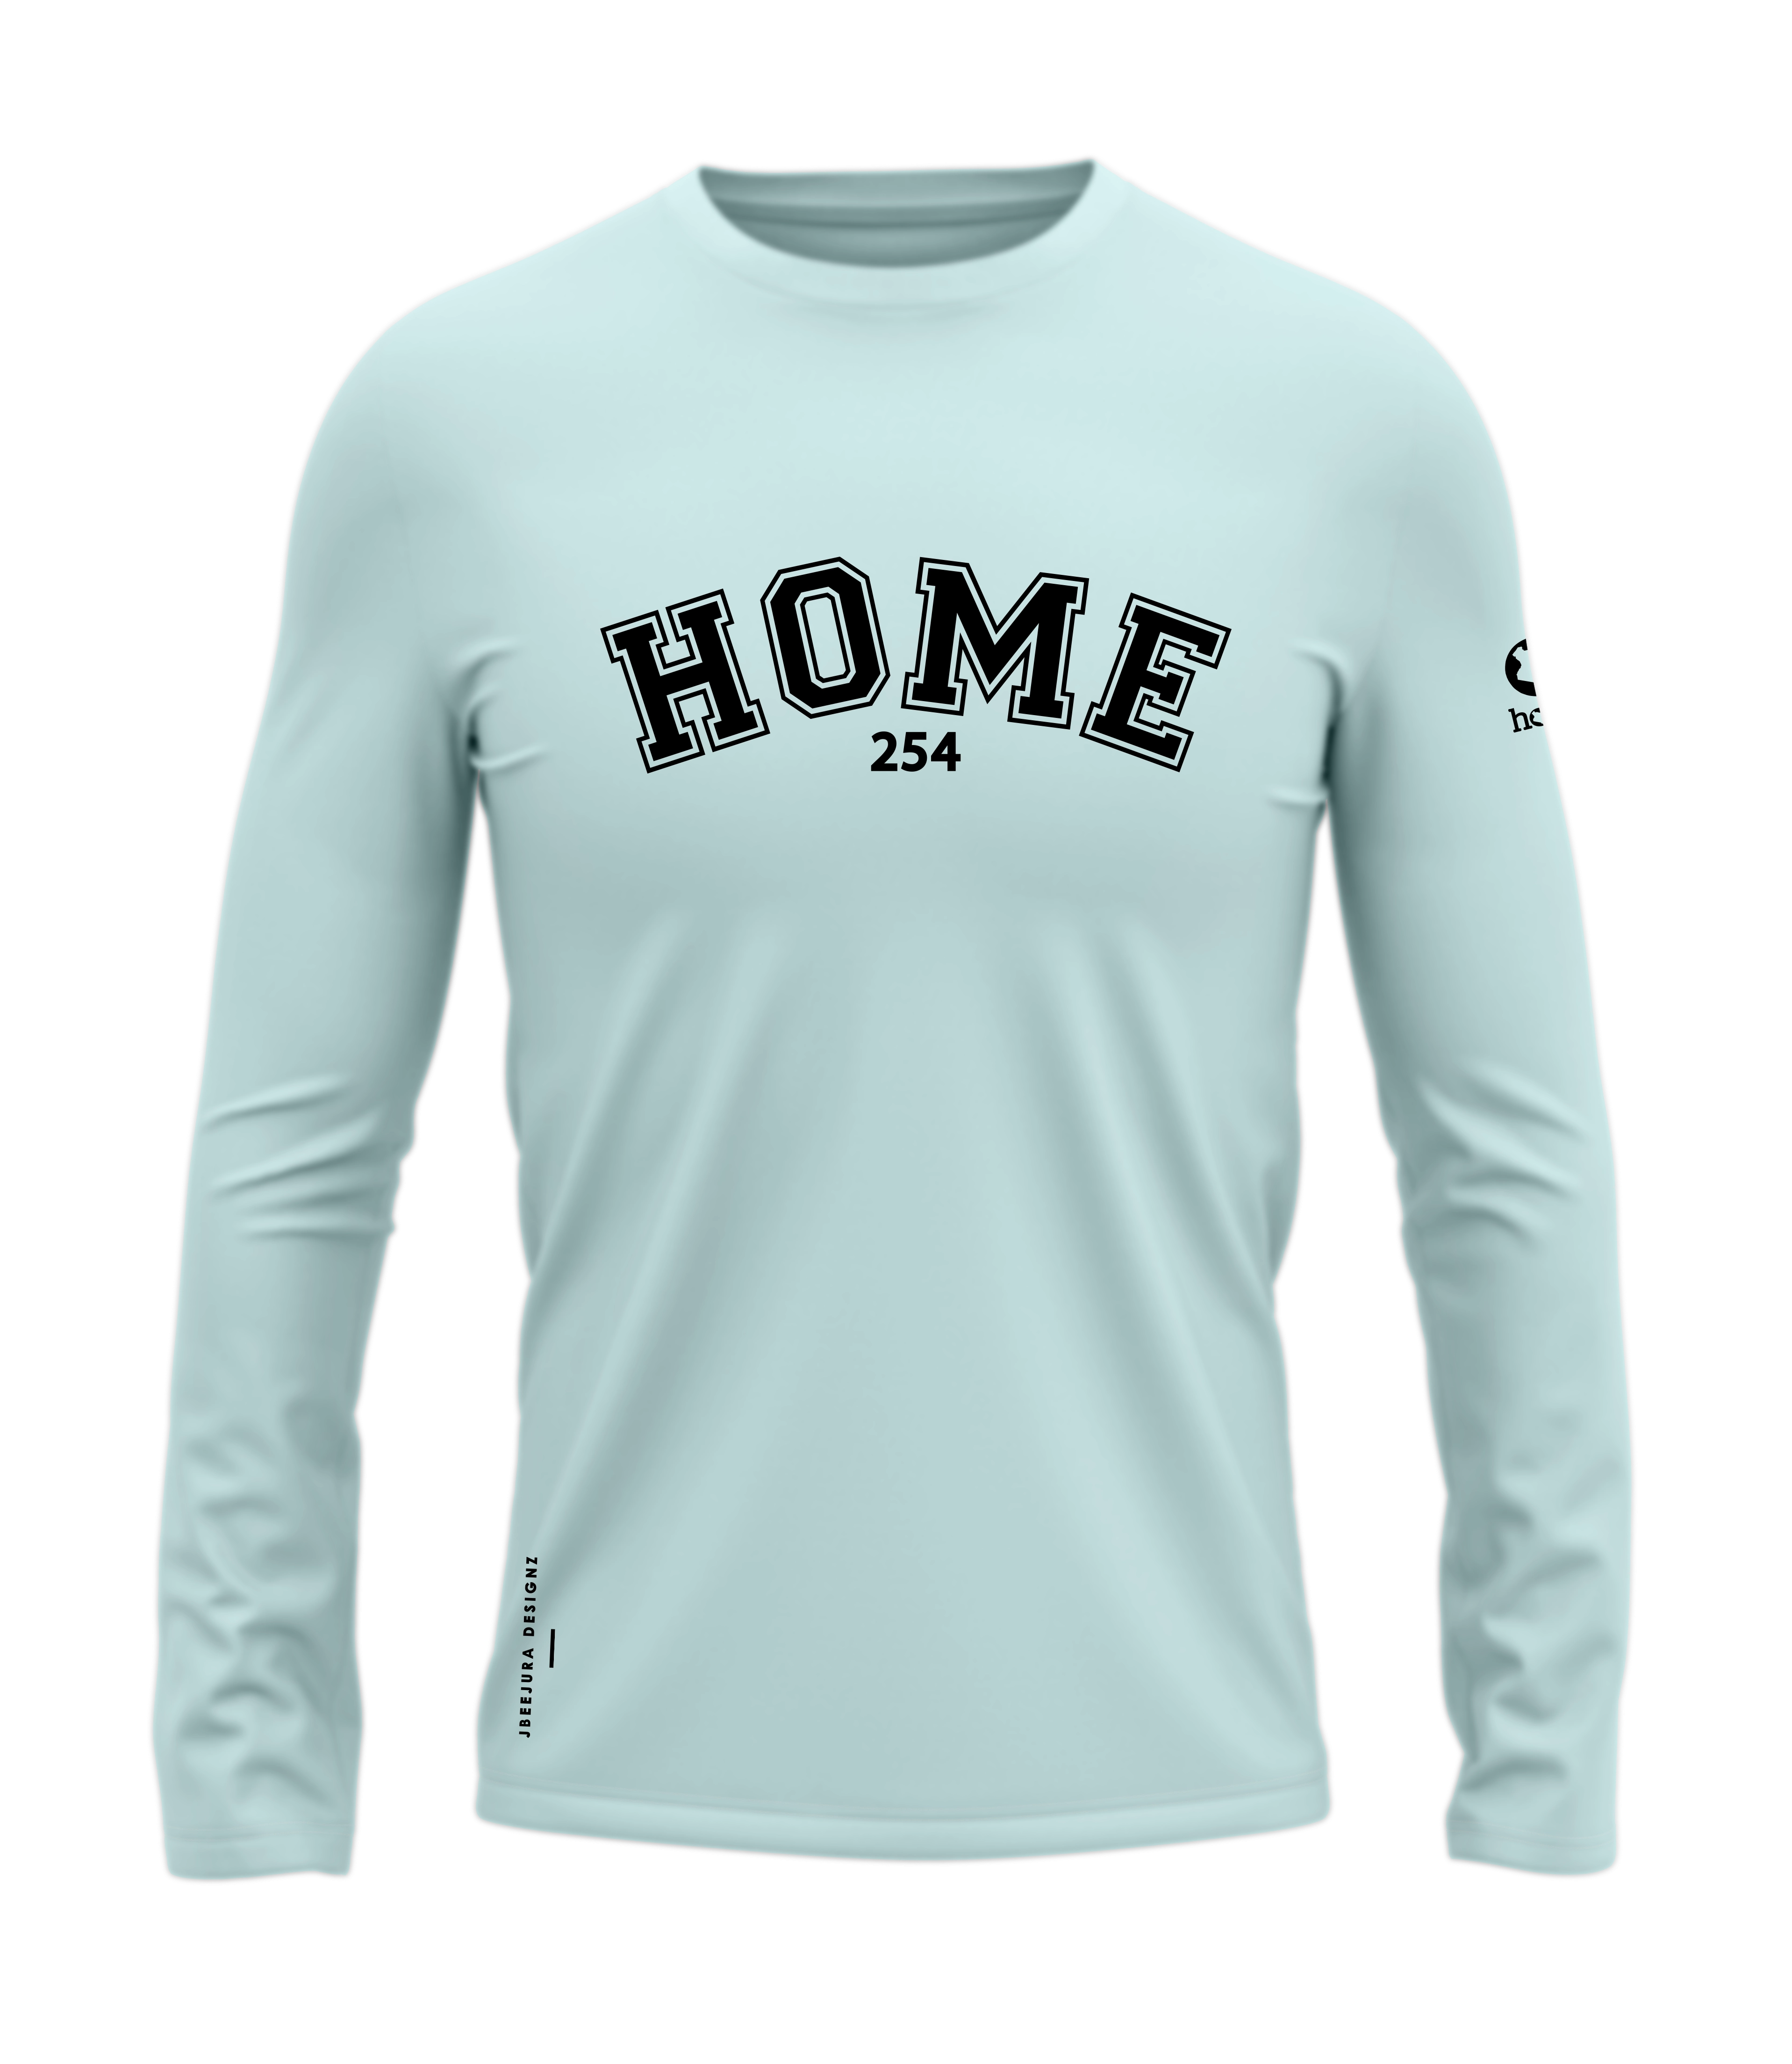 home_254 LONG-SLEEVED MISTY BLUE T-SHIRT WITH A BLACK COLLEGE PRINT – COTTON PLUS FABRIC